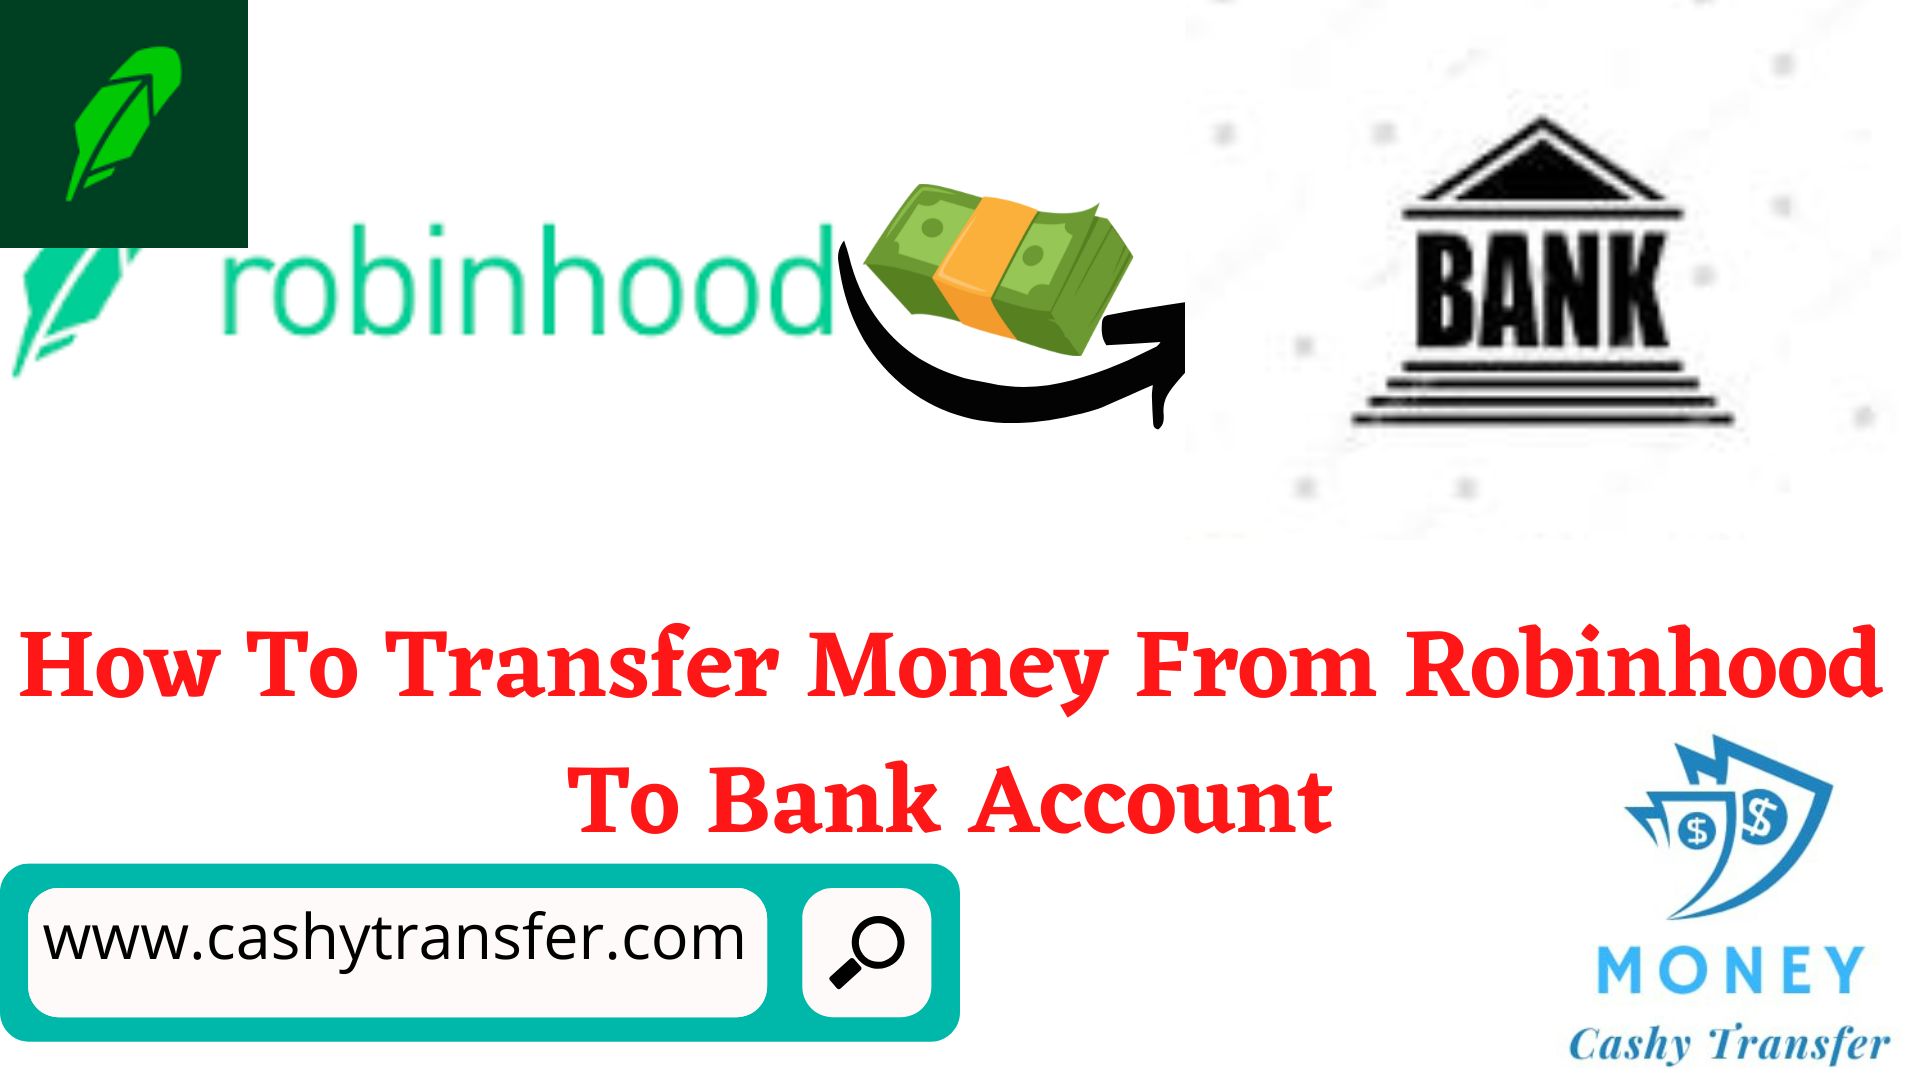 Transfer Money From Robinhood To Bank Account